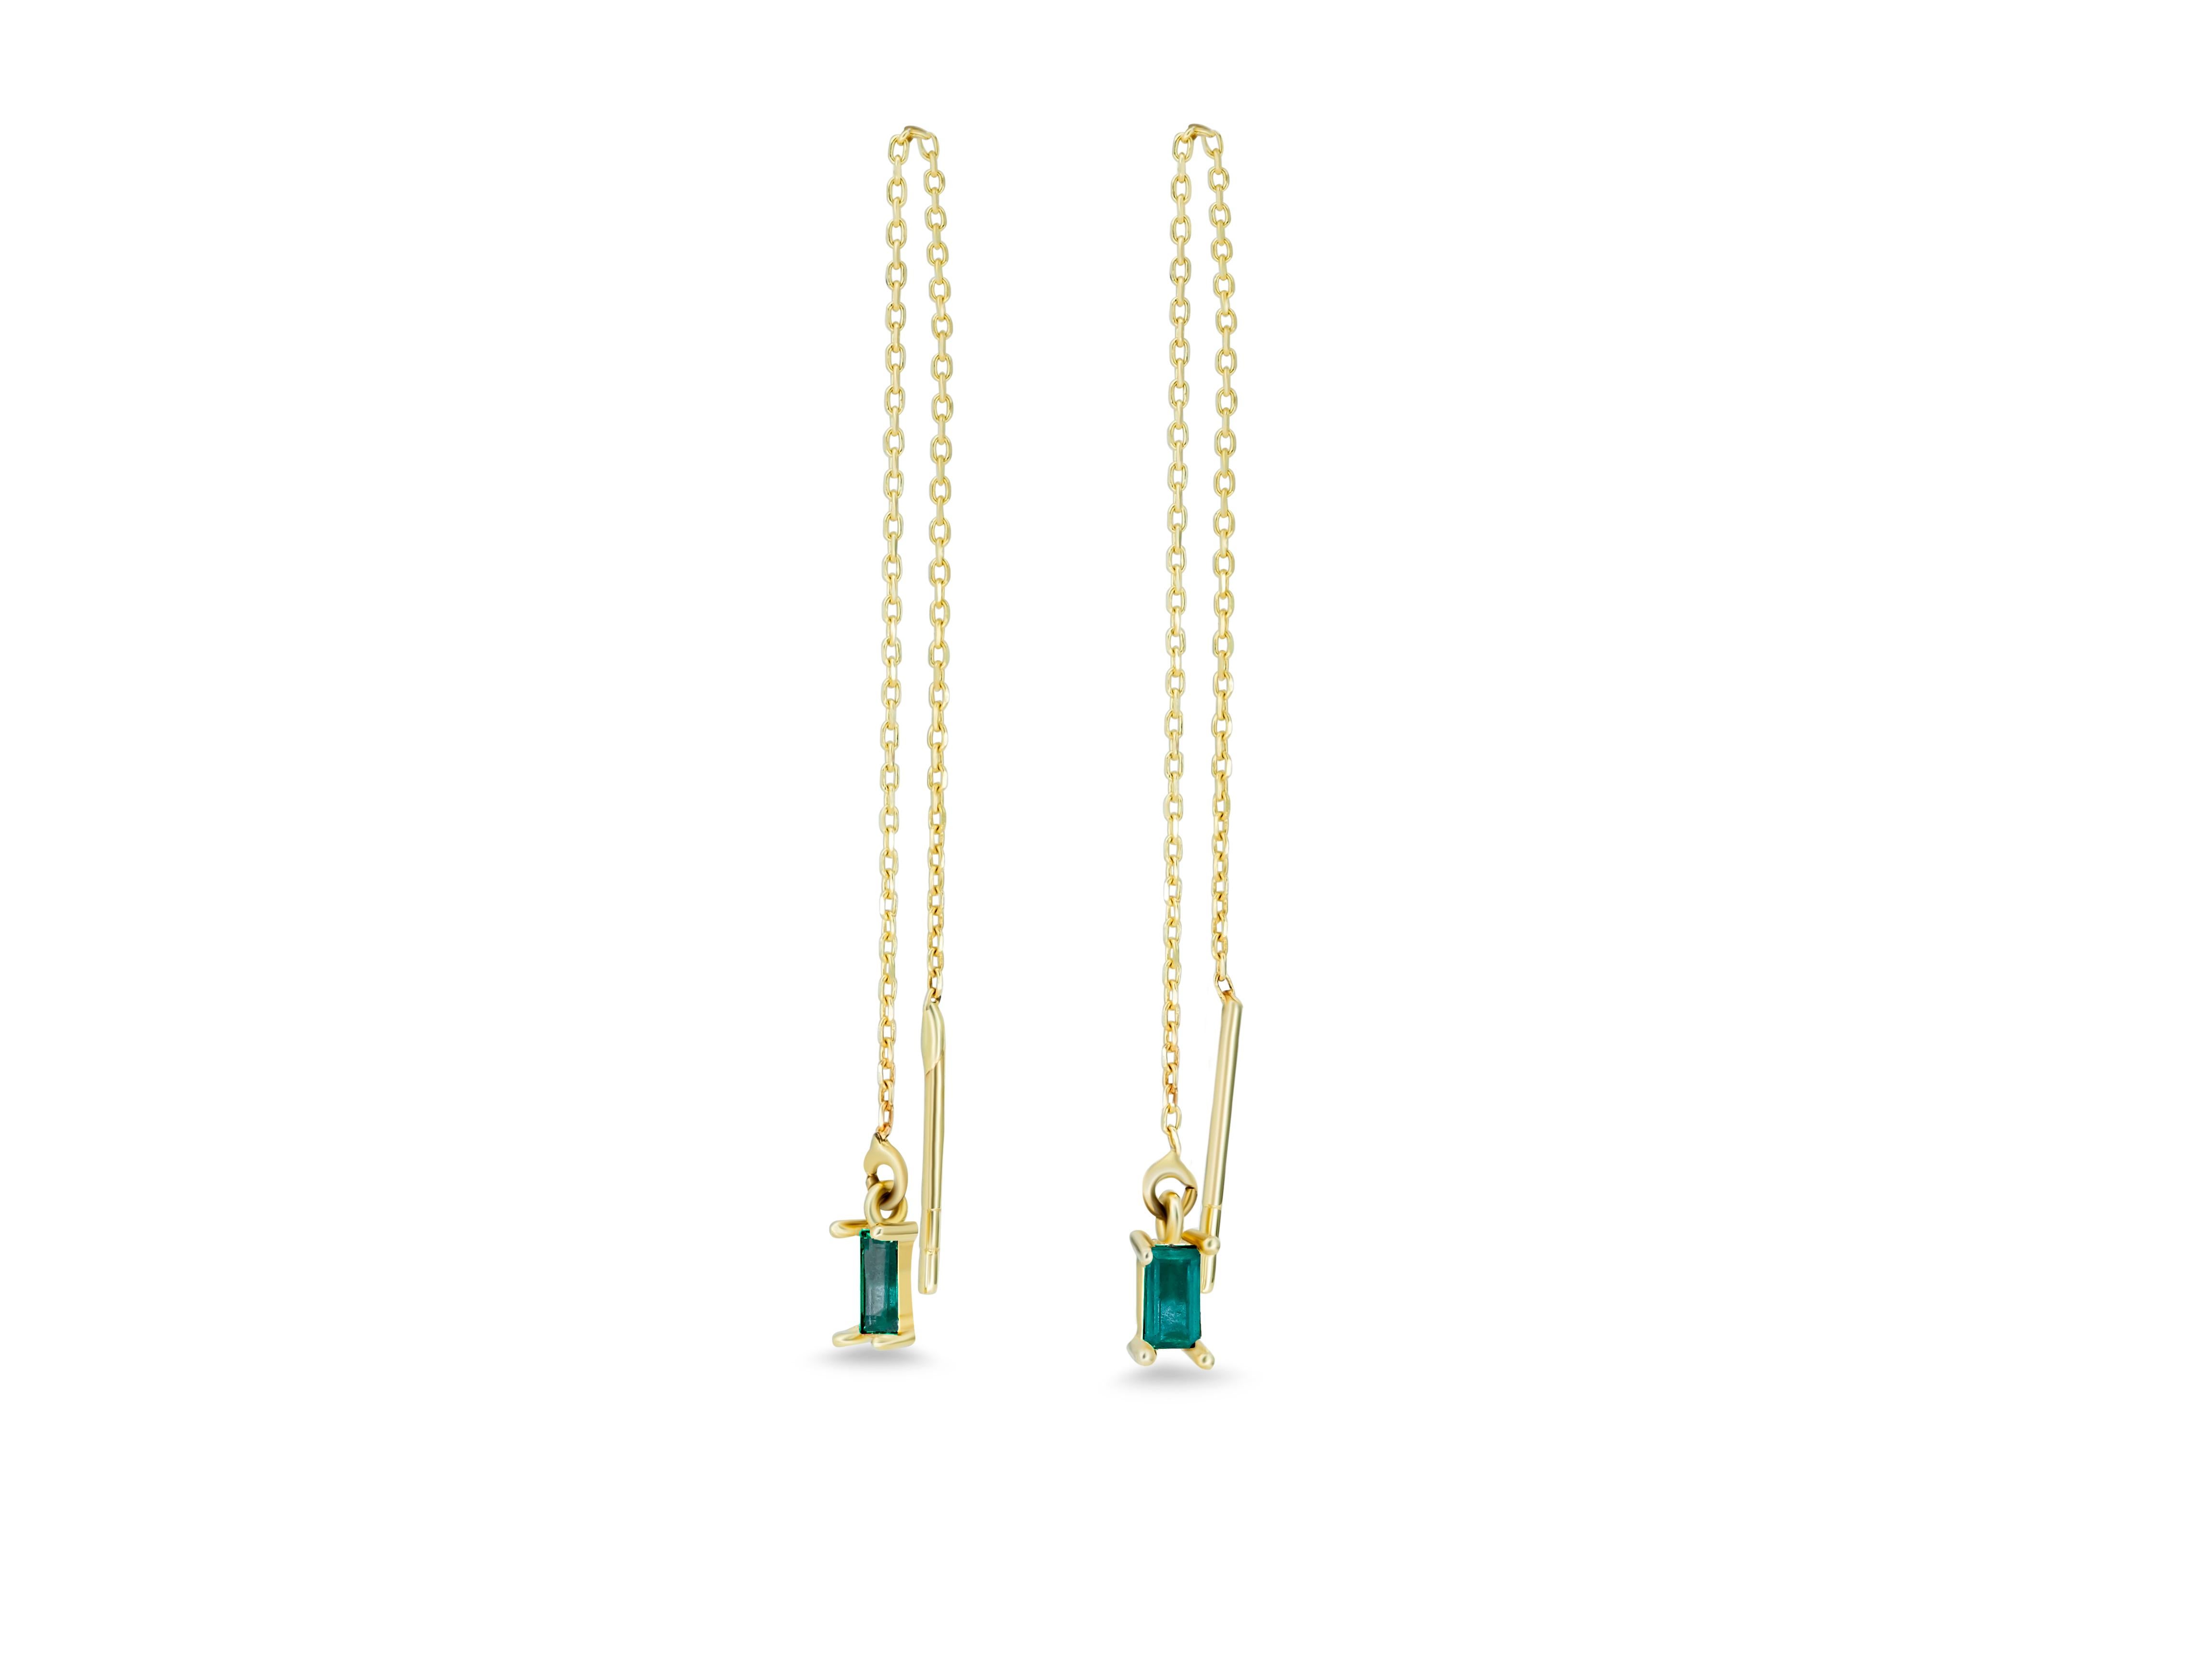 Baguette Cut 14k Solid Gold Drop Earrings with emeralds.  Chain Gold Earrings For Sale